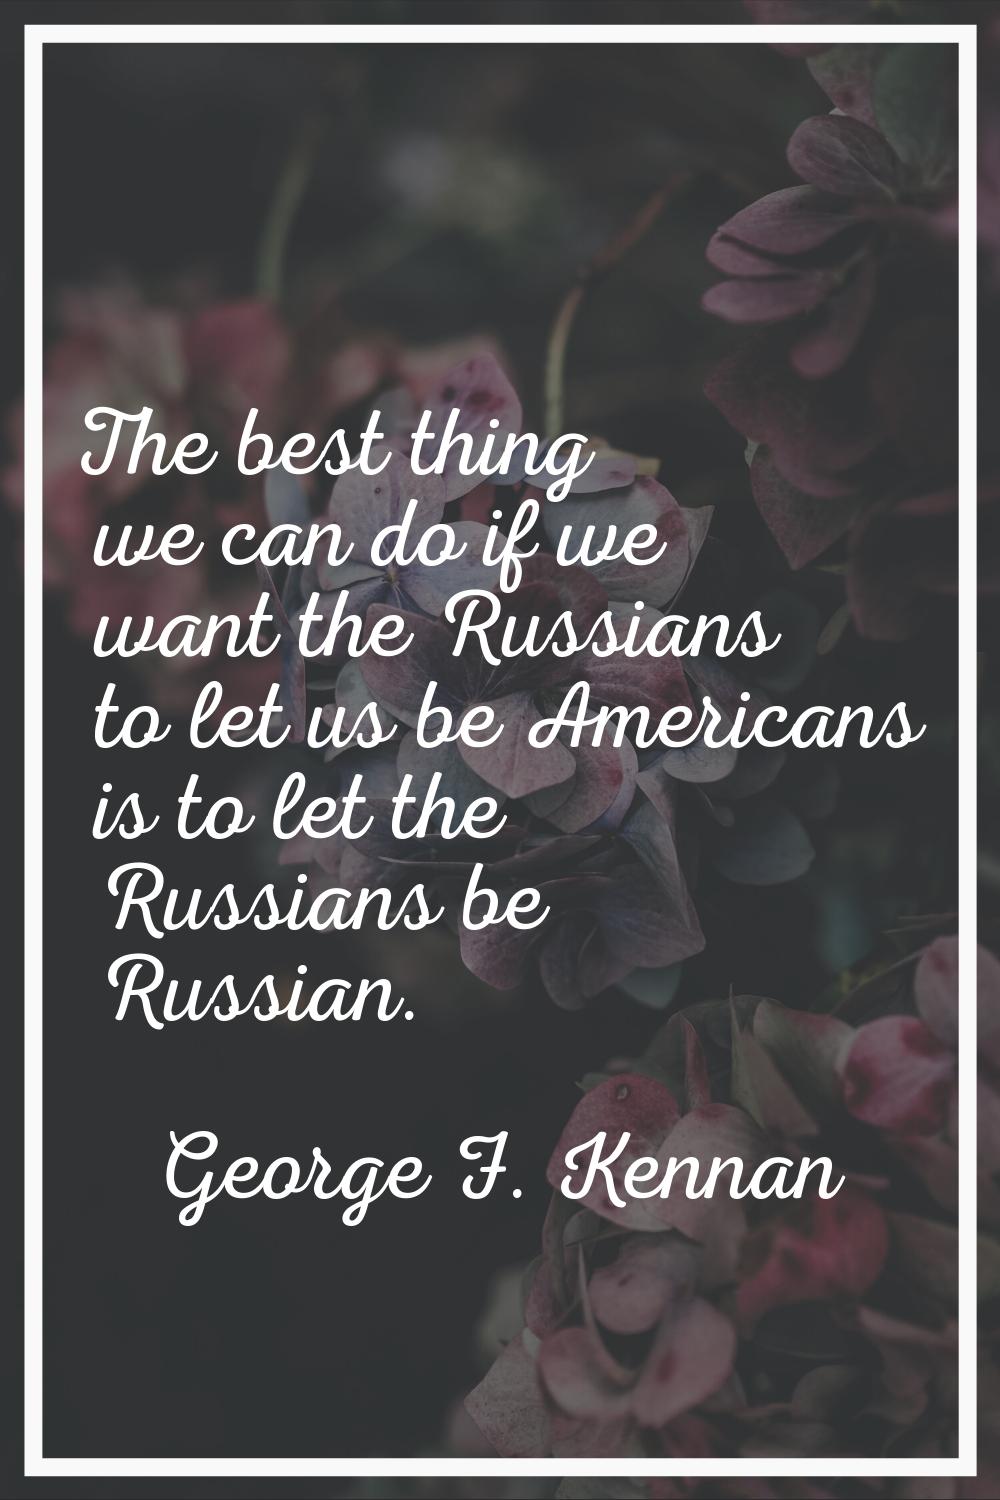 The best thing we can do if we want the Russians to let us be Americans is to let the Russians be R